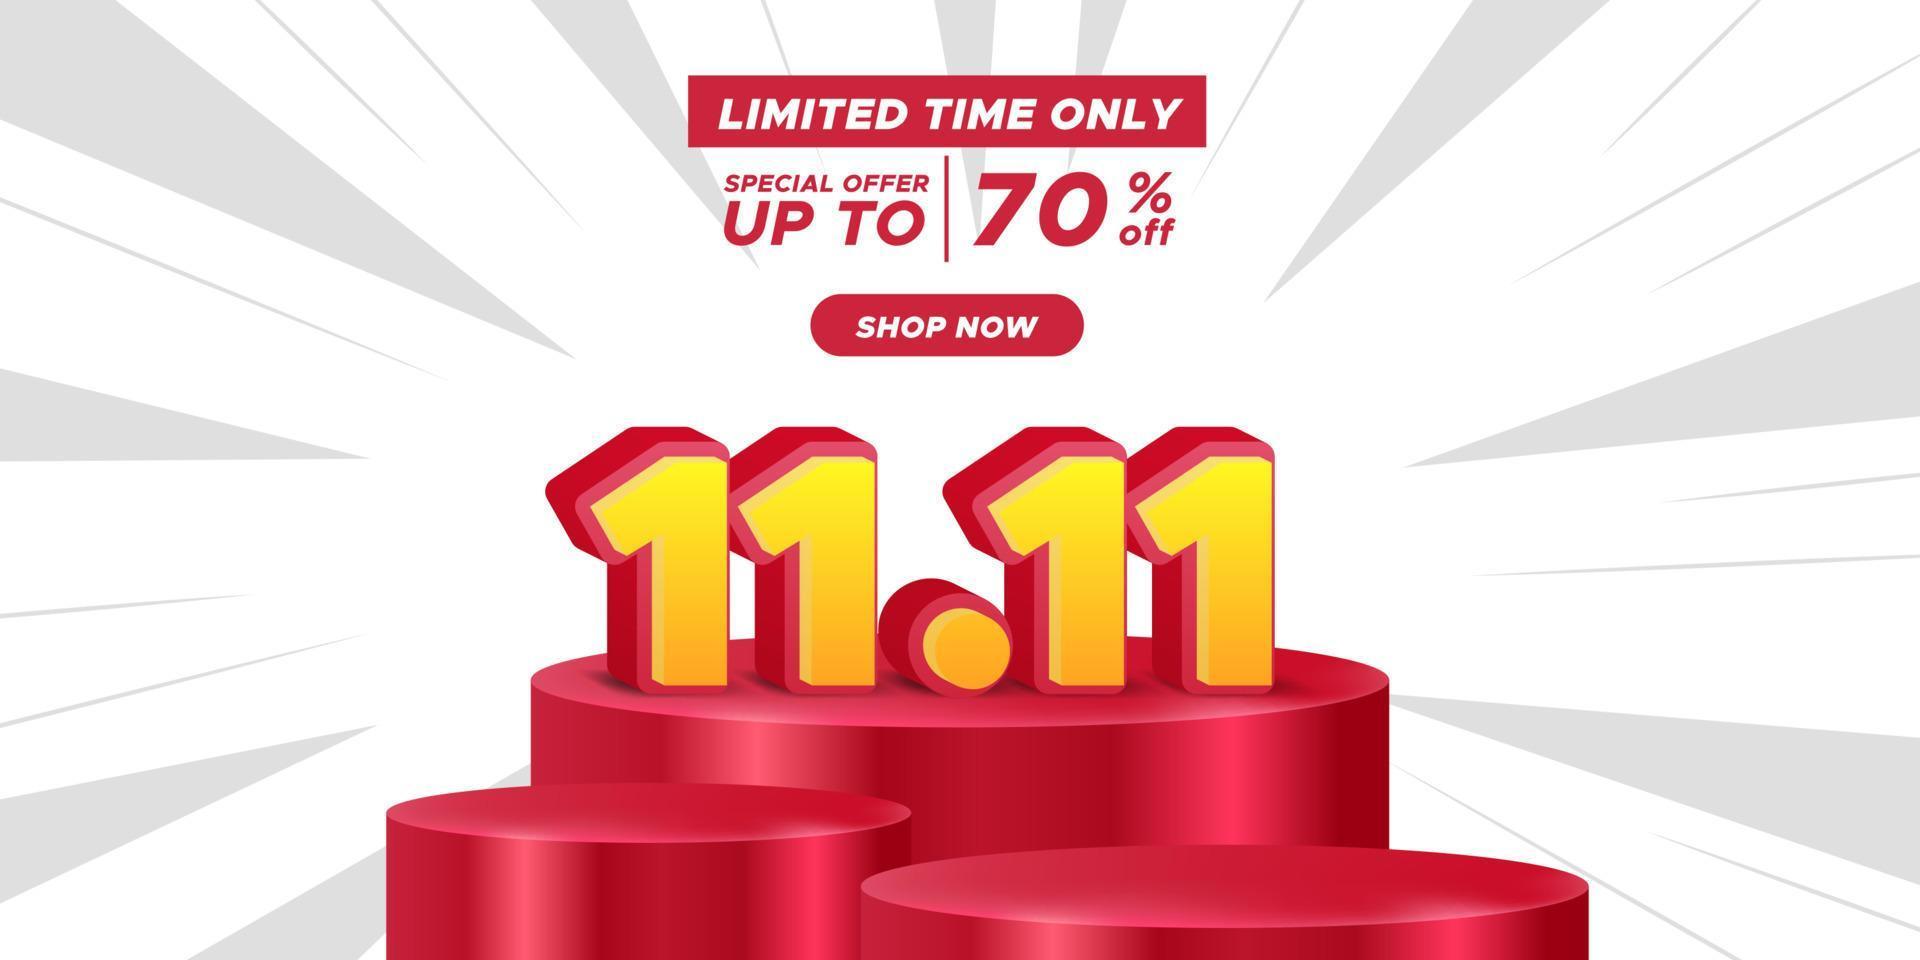 11.11 sale offer banner discount promotion single's day vector